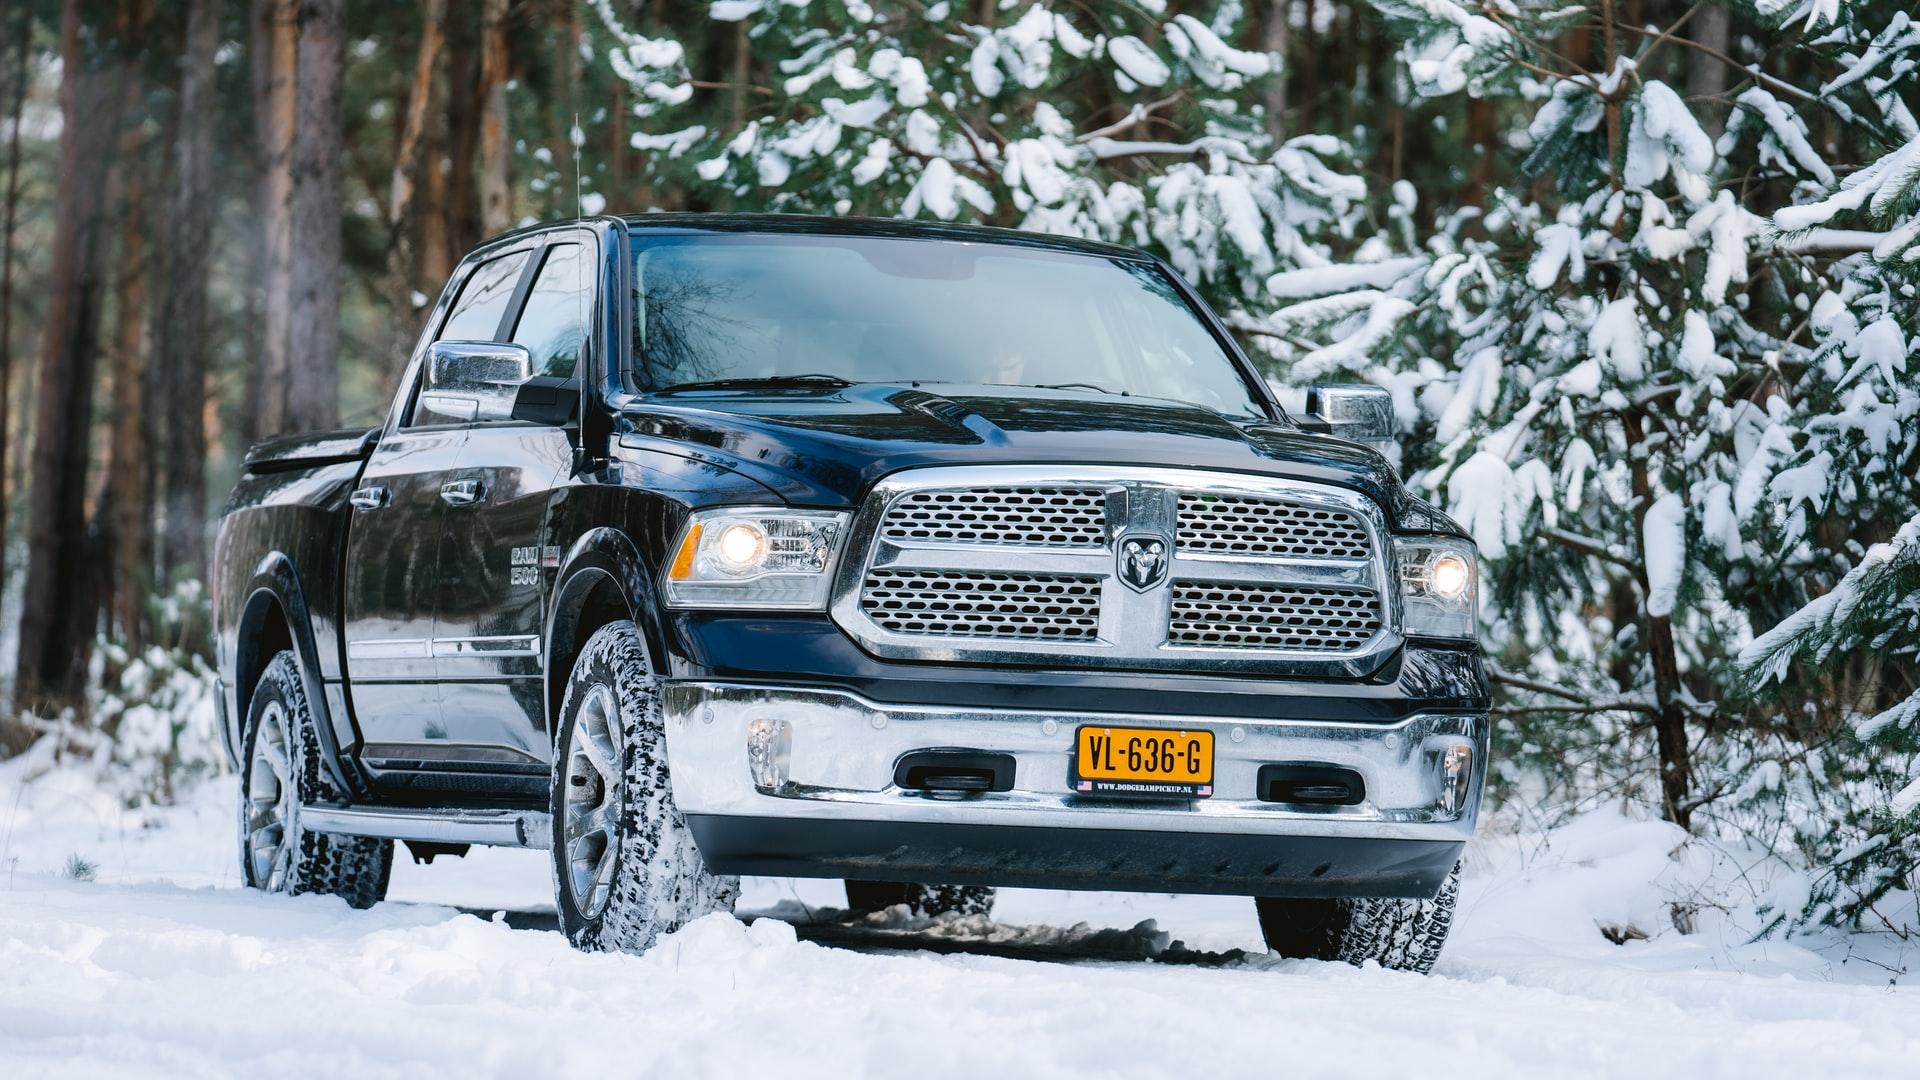 Ram brought cool new updates to their Ram 1500 Limited truck